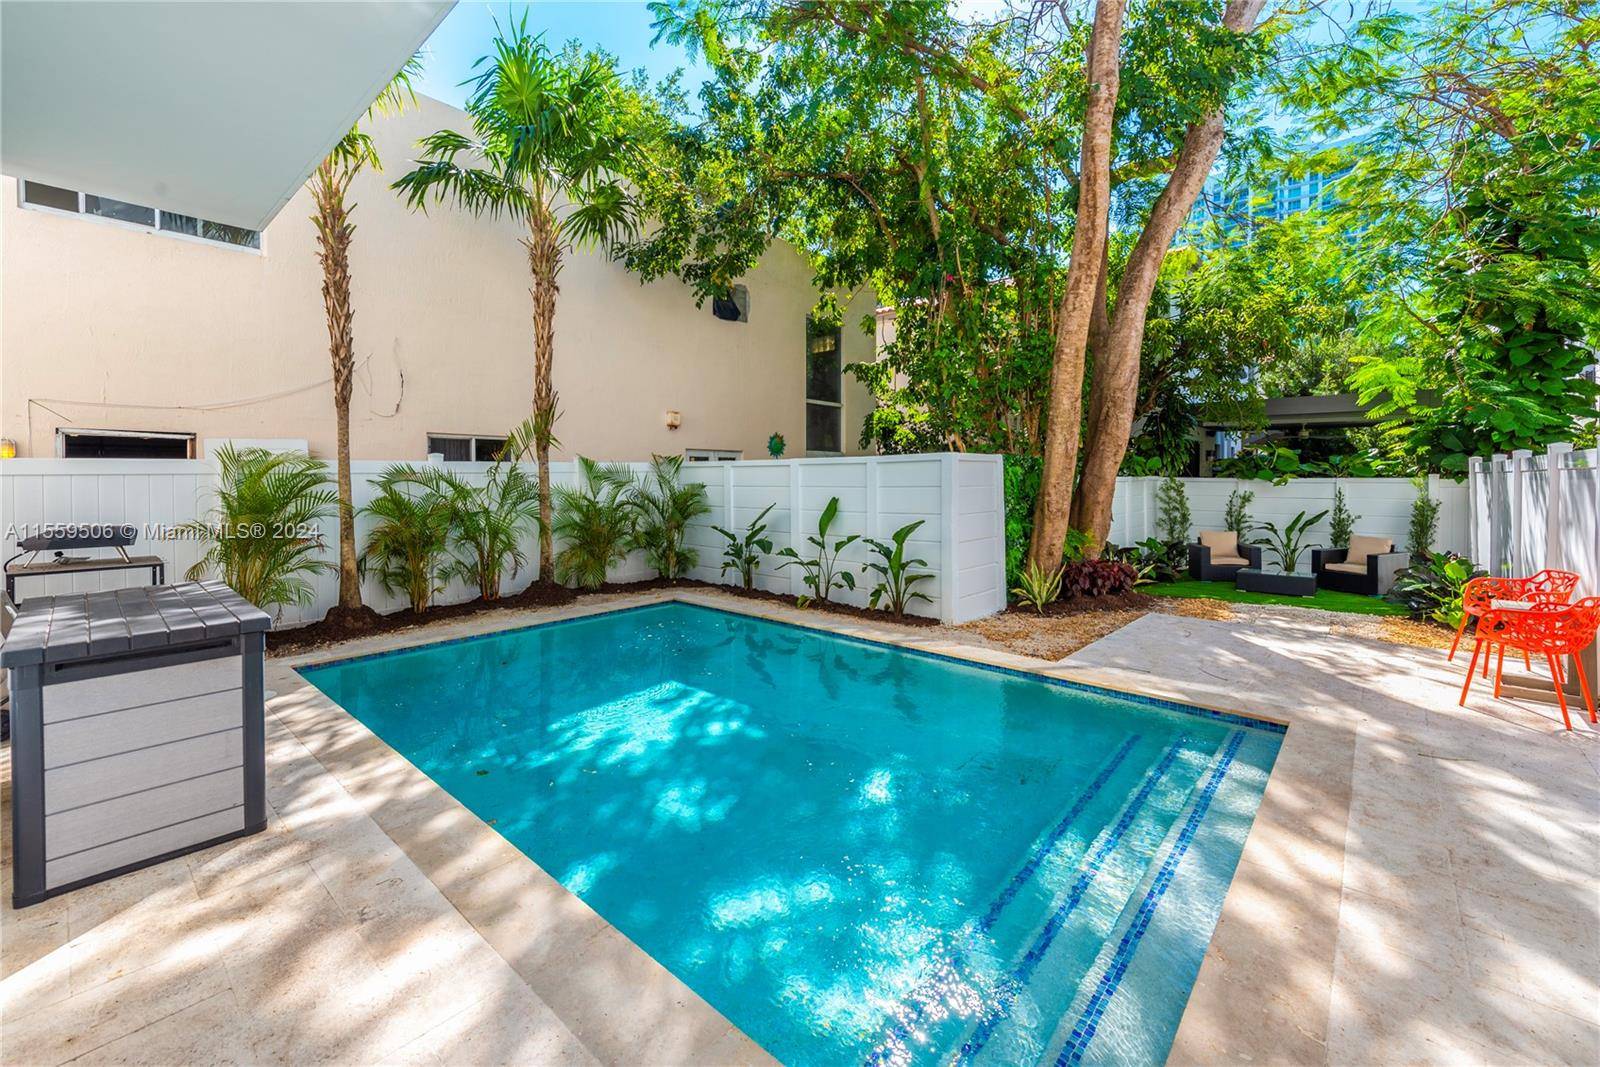 Welcome to your own private oasis in the heart of Coconut Grove !